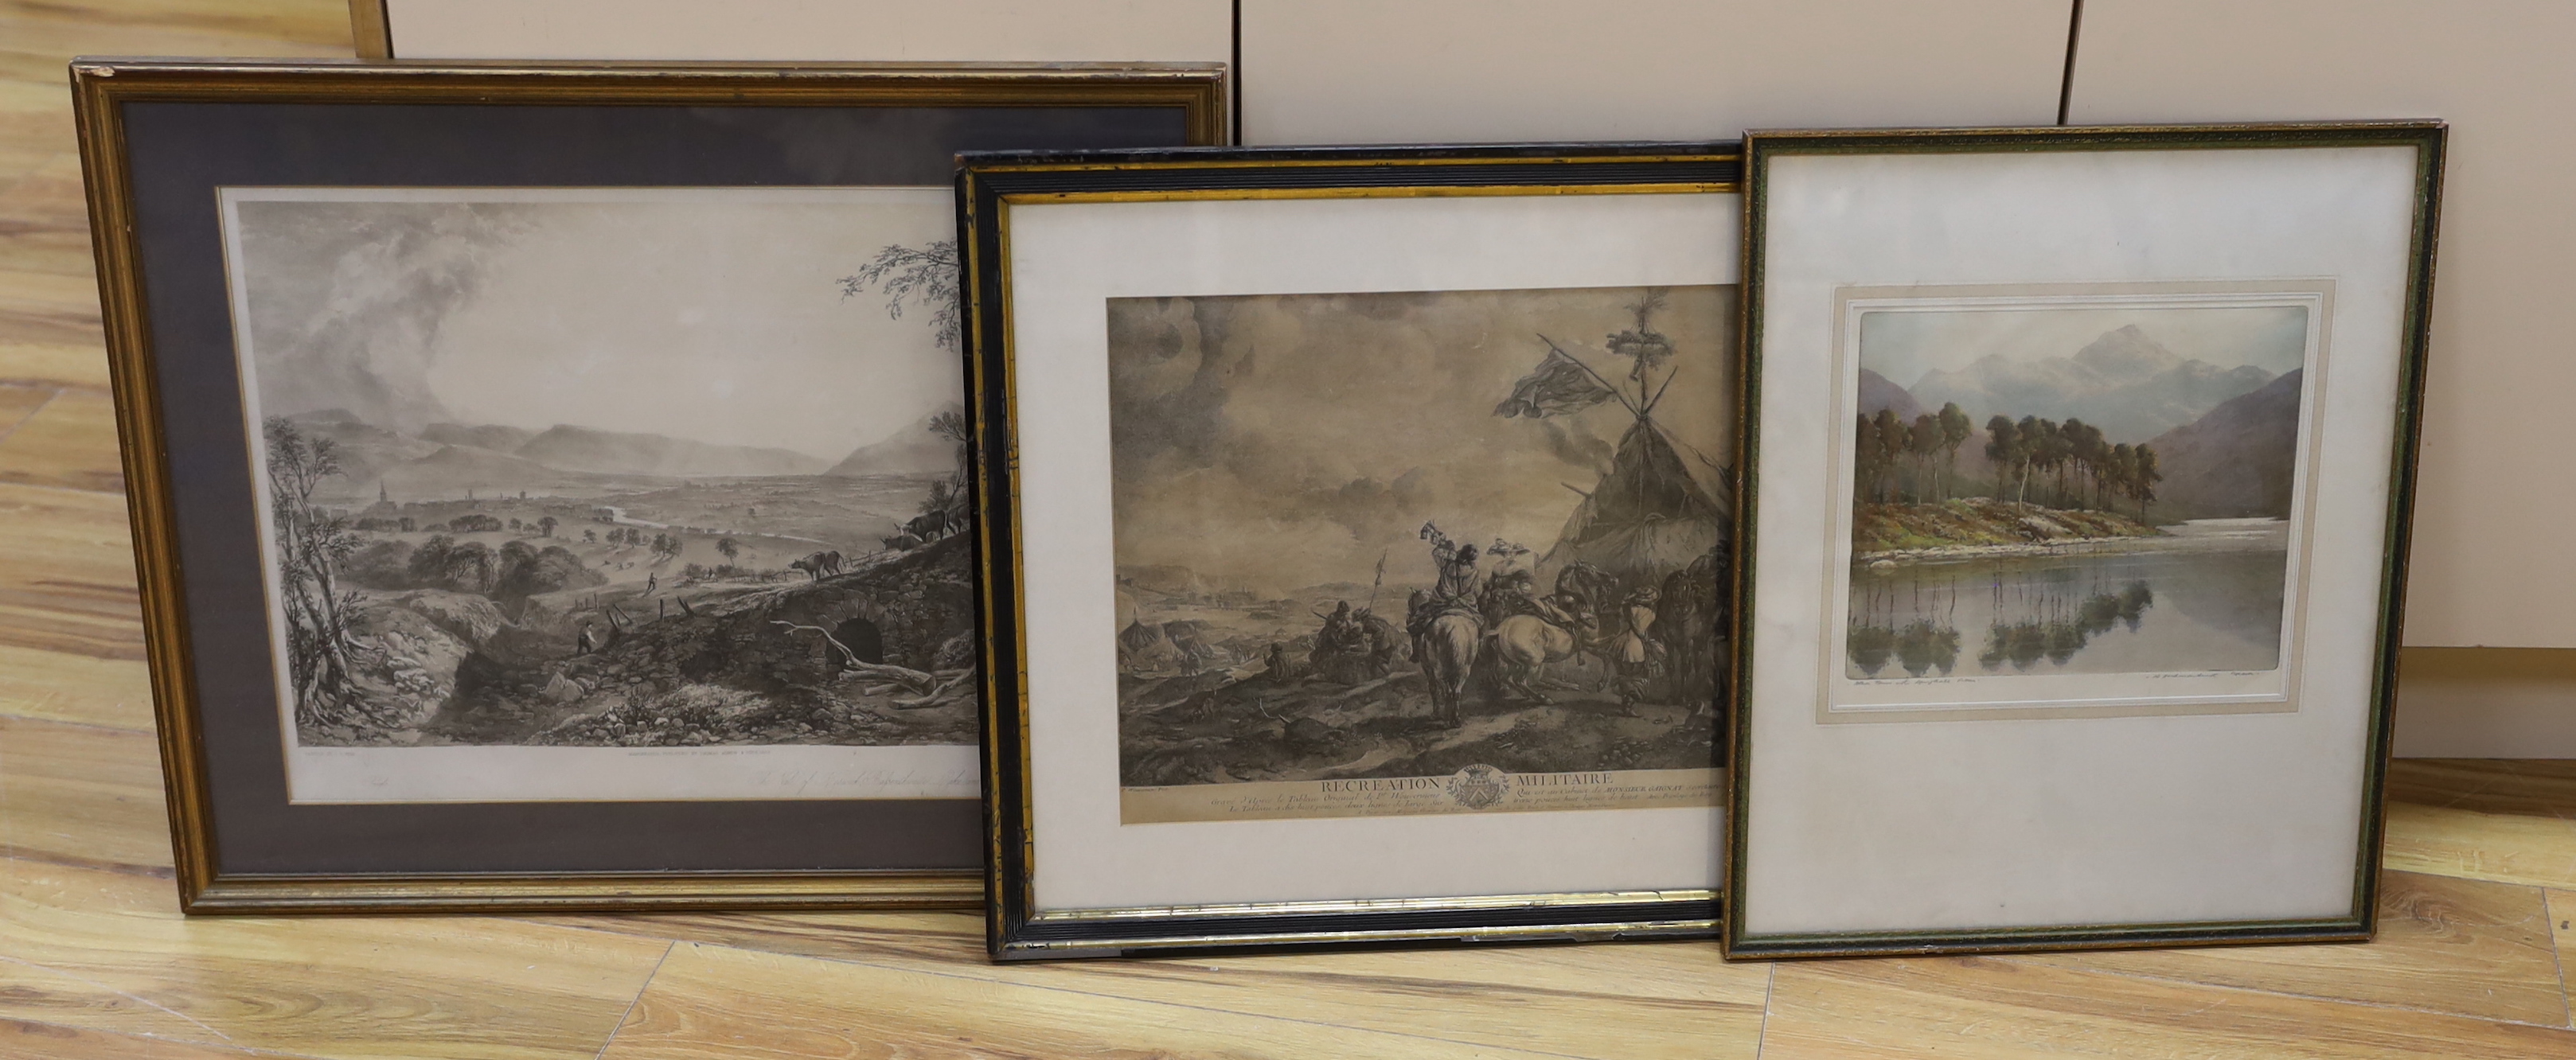 After Philip Wouwerman (Dutch, 1619–1668), 18th century engraving, 'Recreation Militaire' together with two other prints including one by Robert Herdman Smith